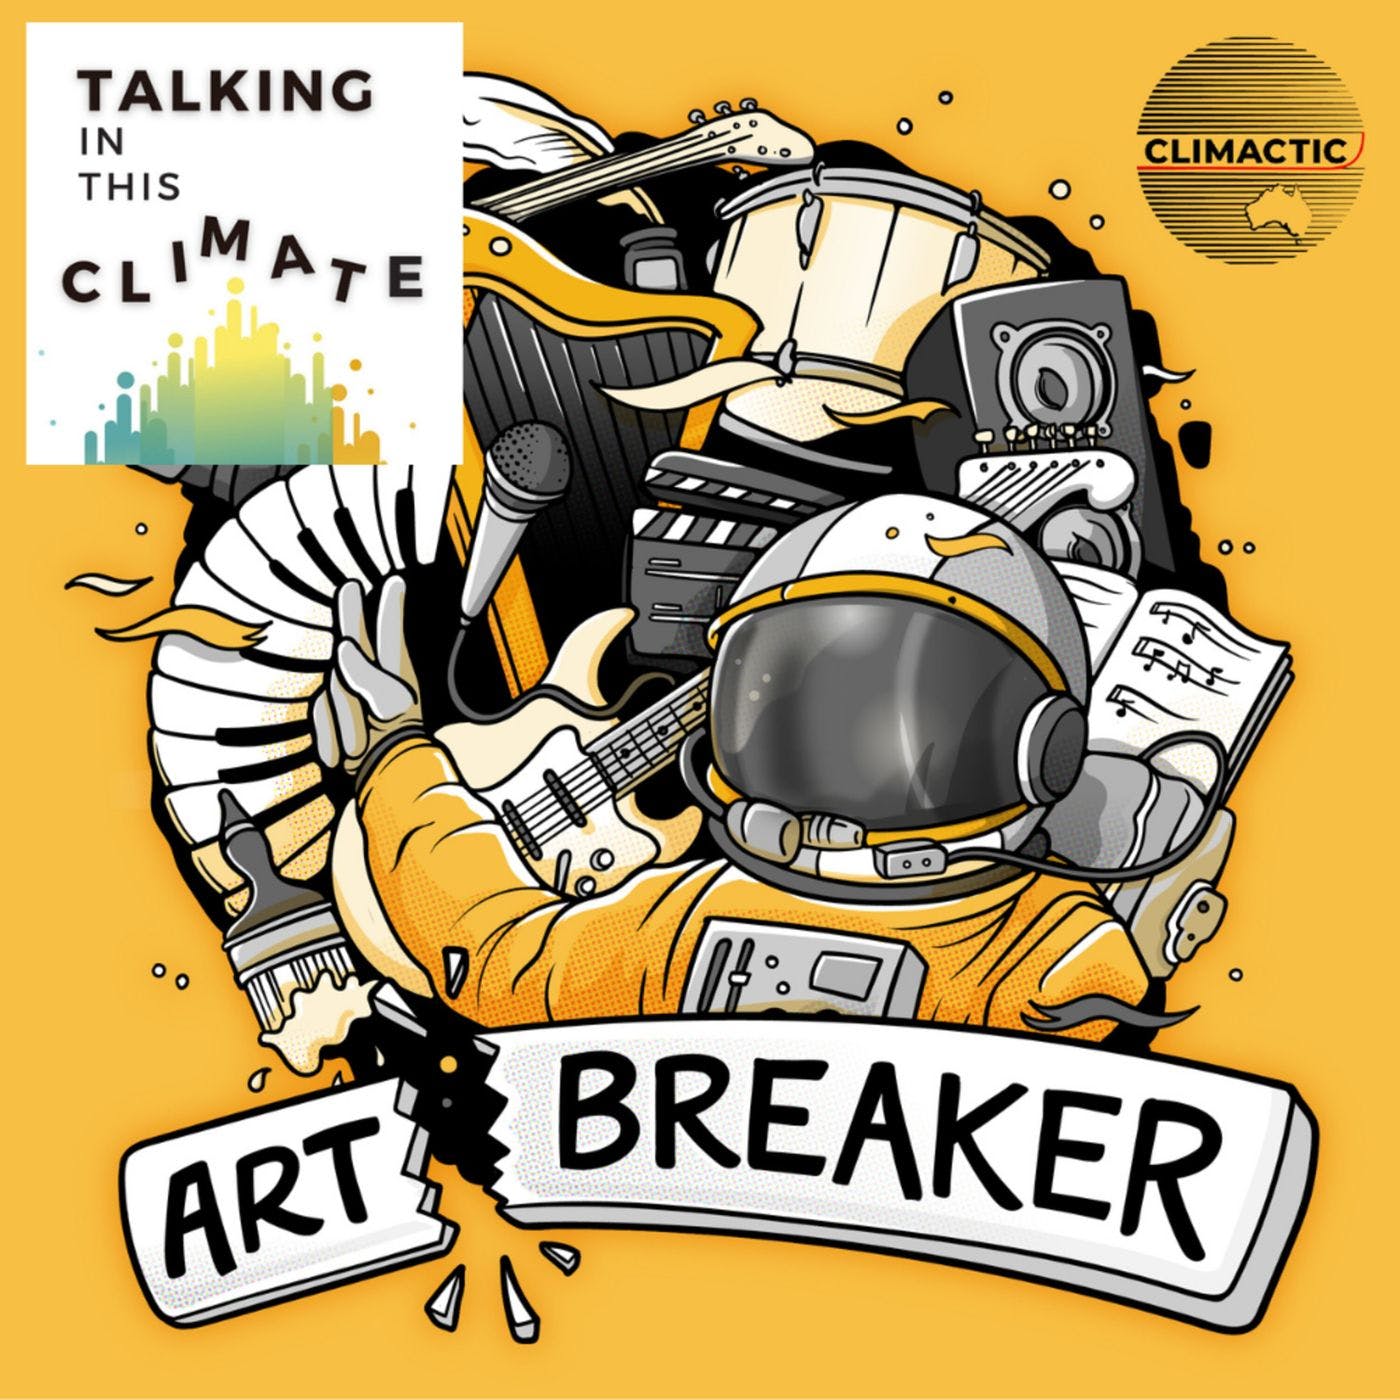 "How the arts can connect and sustain us in the climate movement" | Talking In This Climate